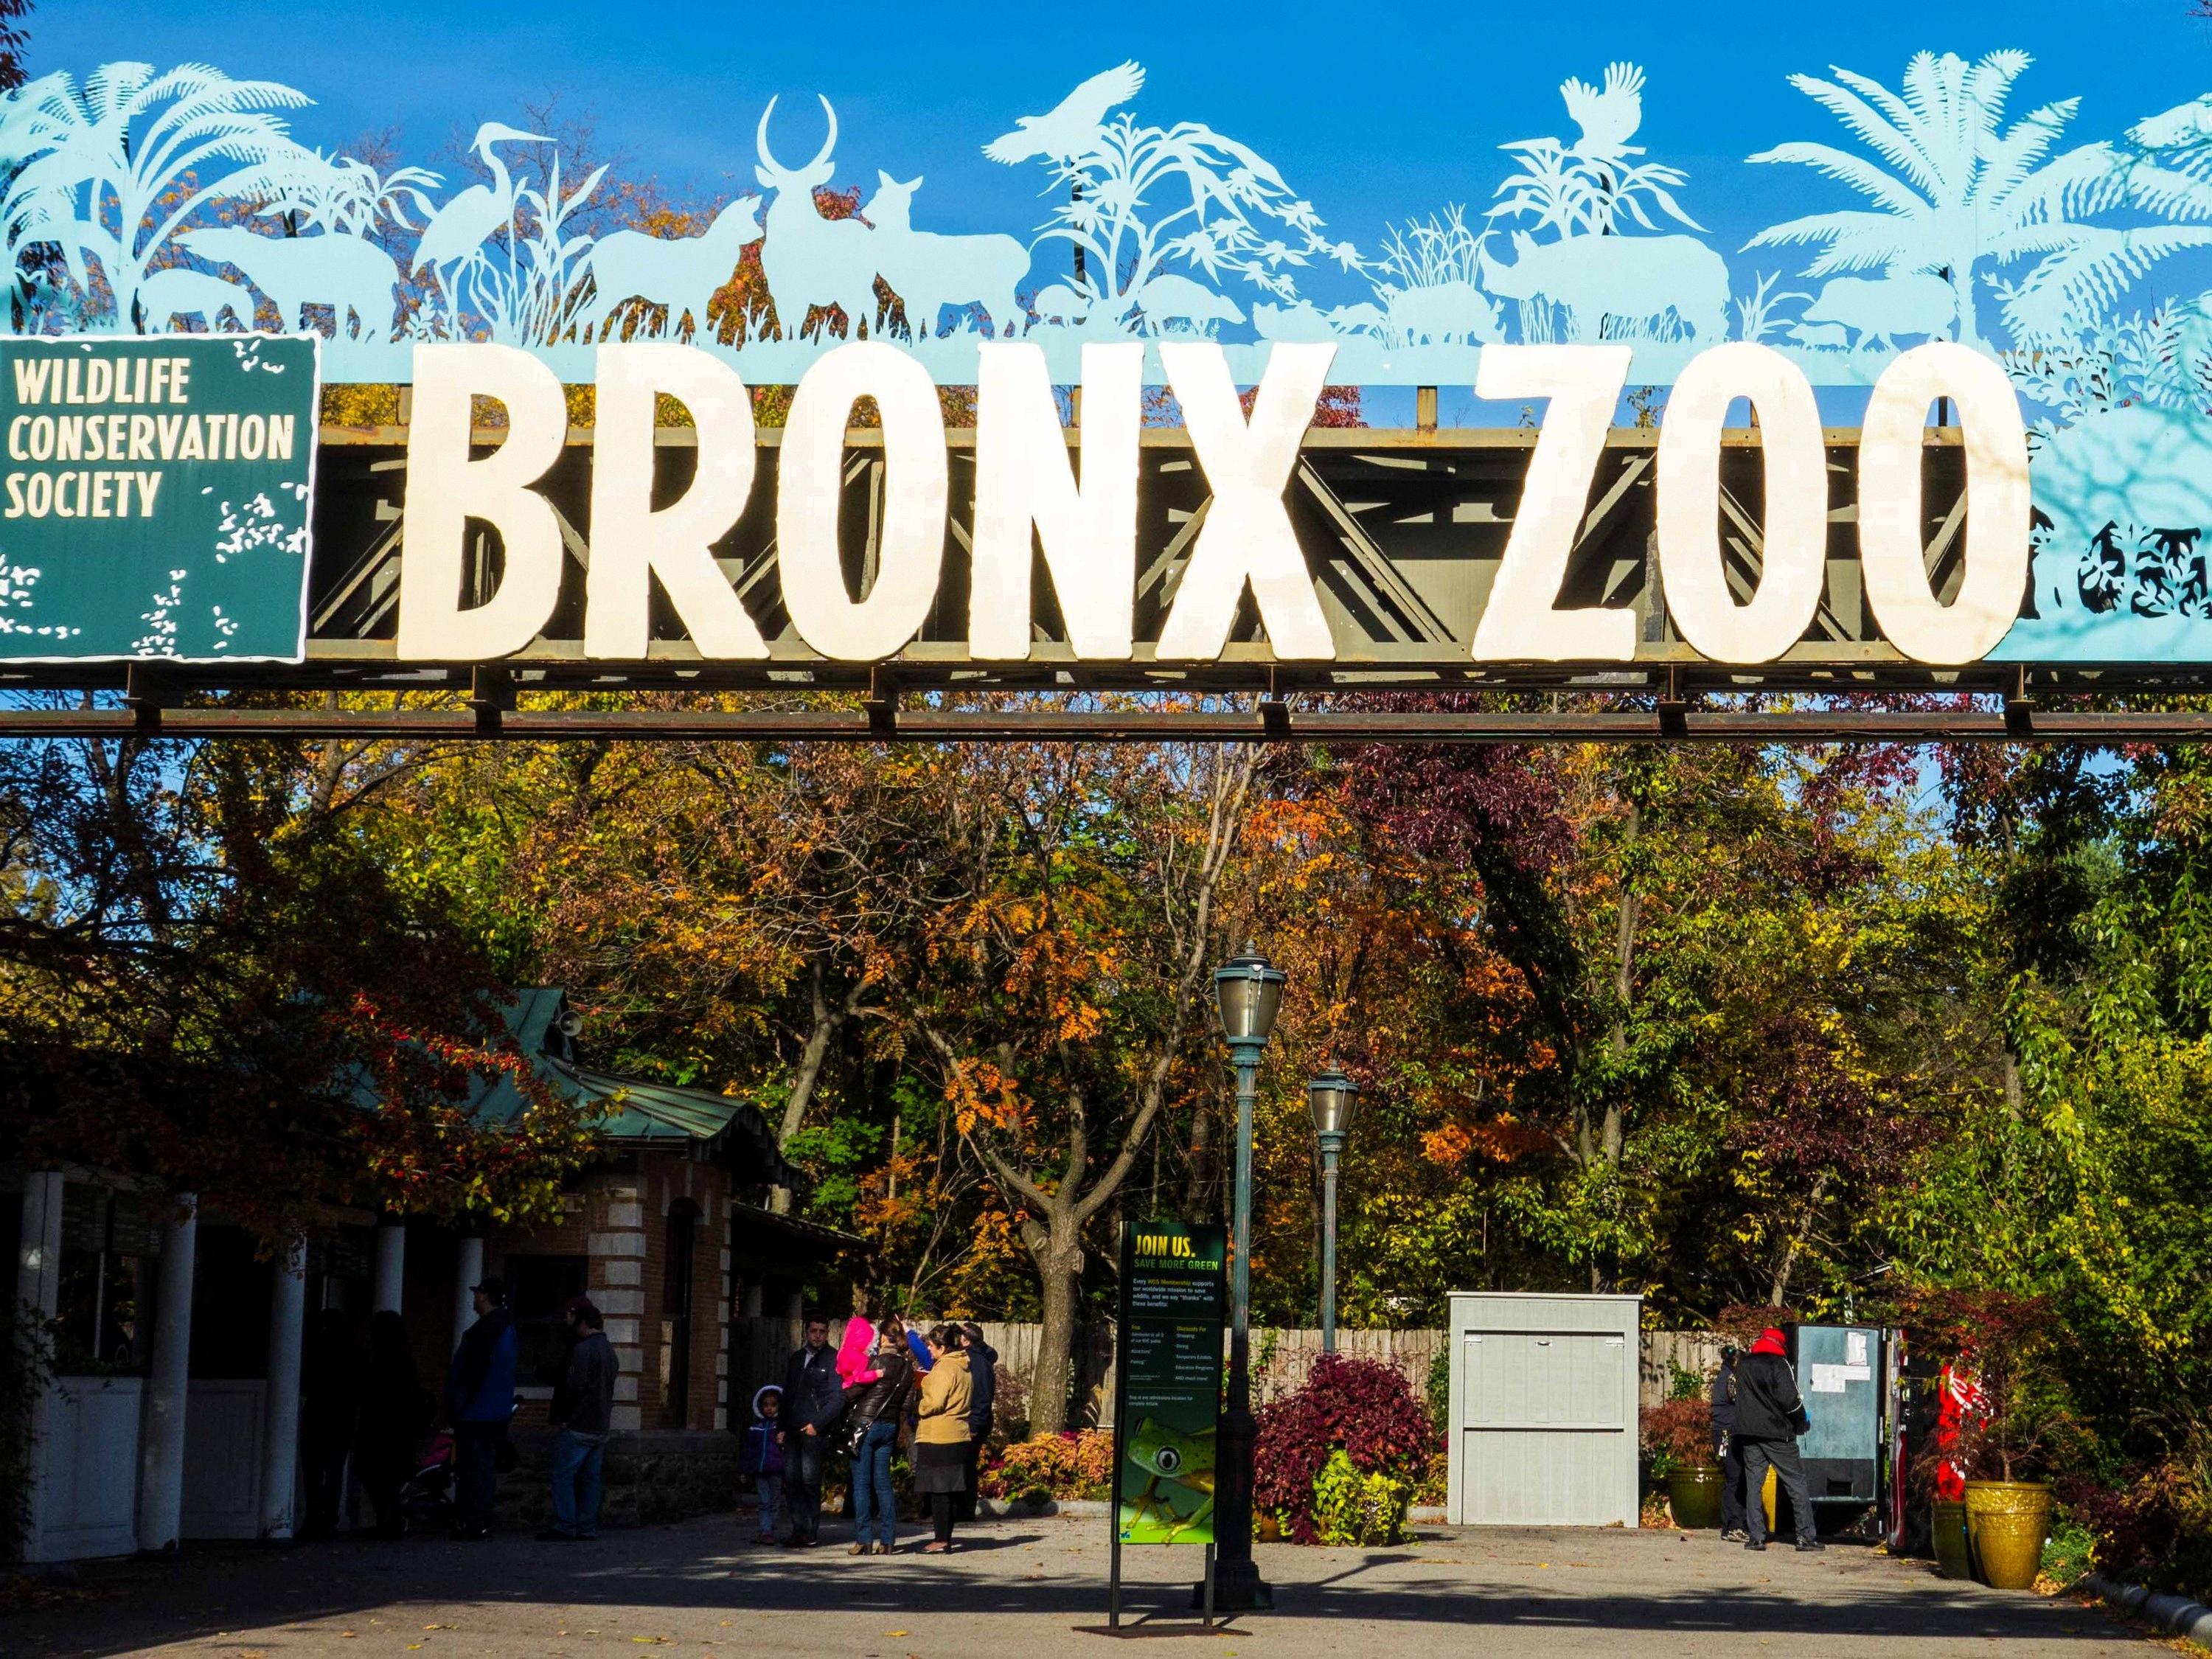 Explore the Bronx Zoo for Free on Wednesdays!